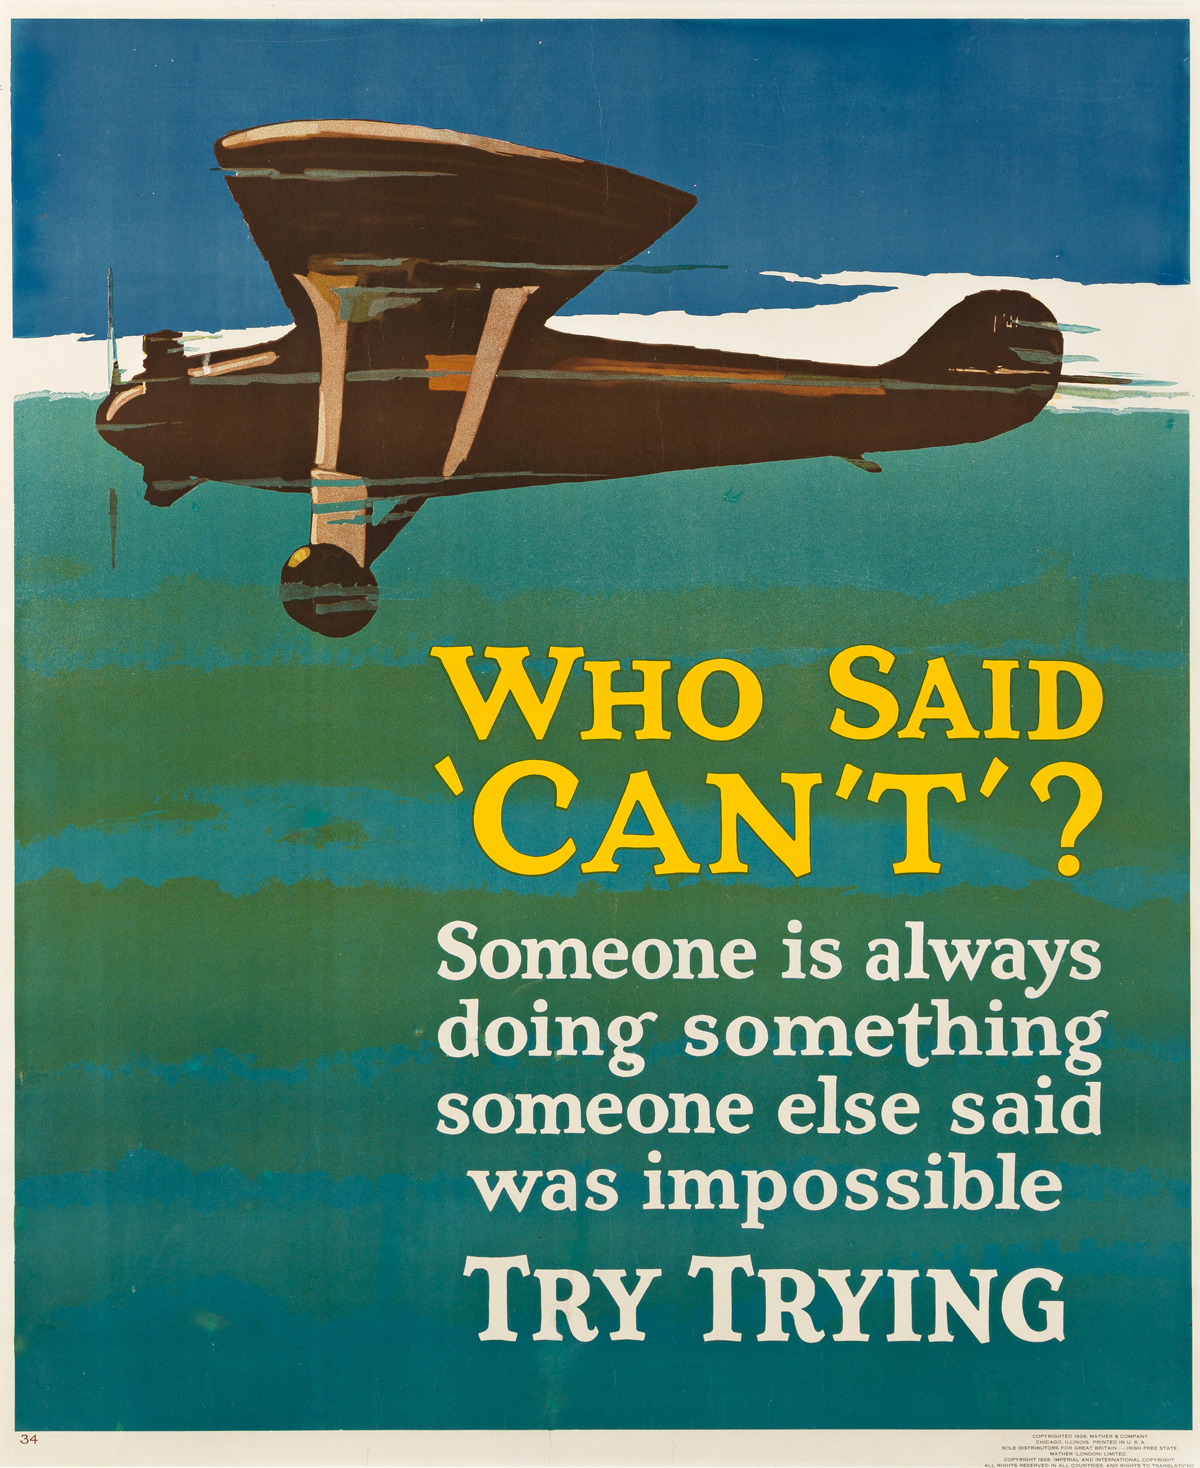 DESIGNER UNKNOWN.  WHO SAID CANT? / TRY TRYING. 1929. 43¾x36 inches, 111x91½ cm. Mather & Company, Chicago.